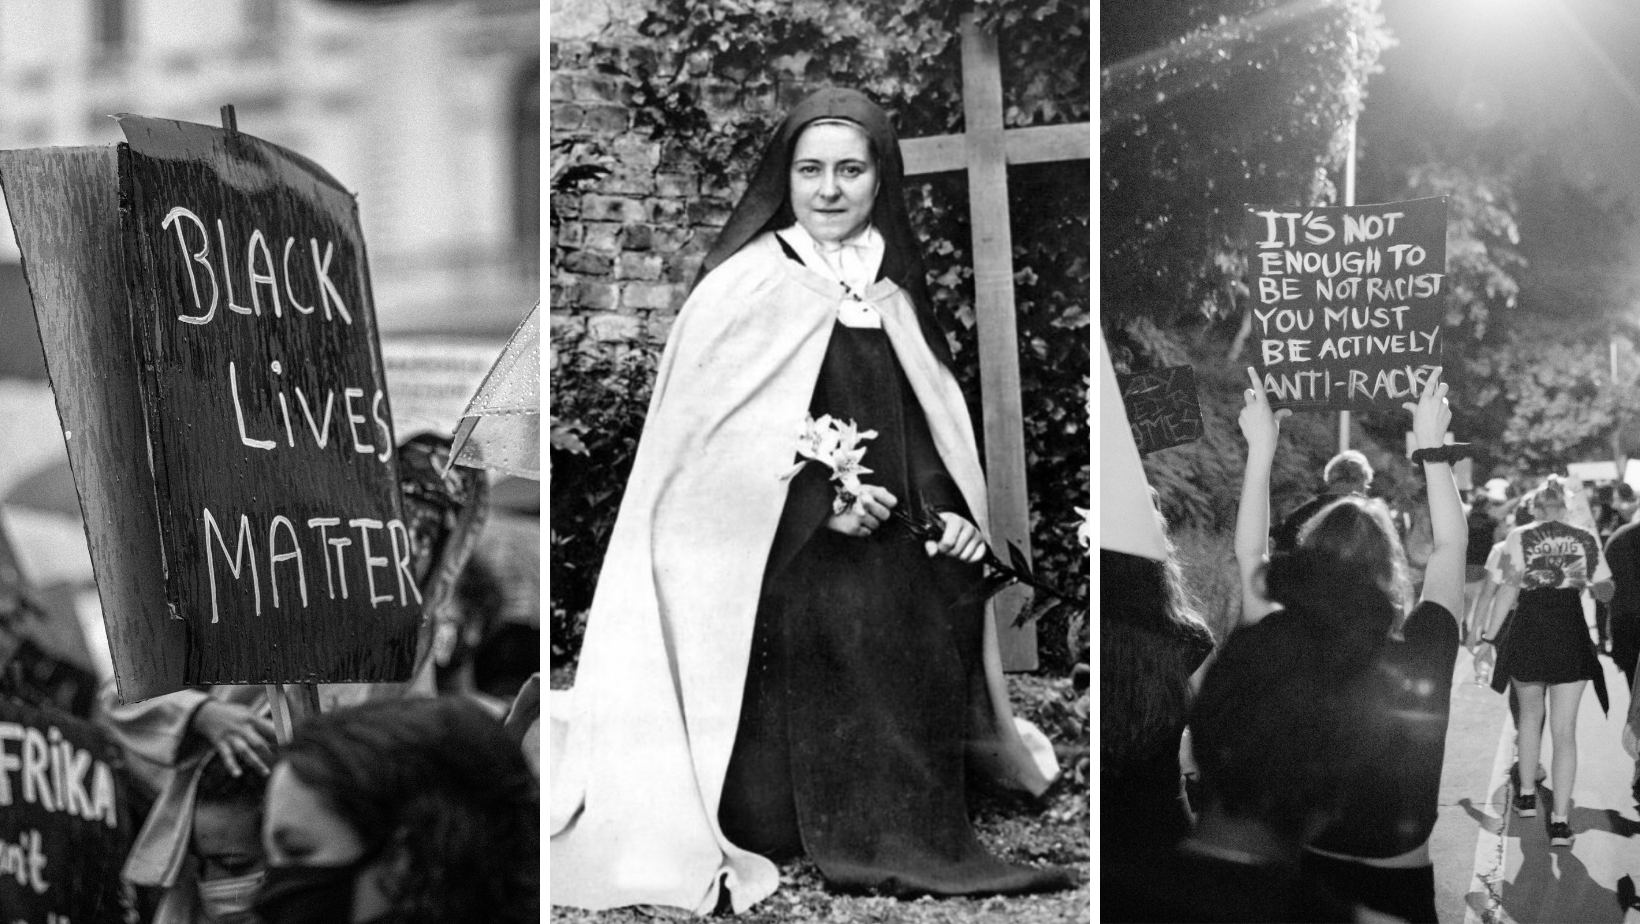 What Does Therese of Lisieux Have to Do with Anti-Racism?